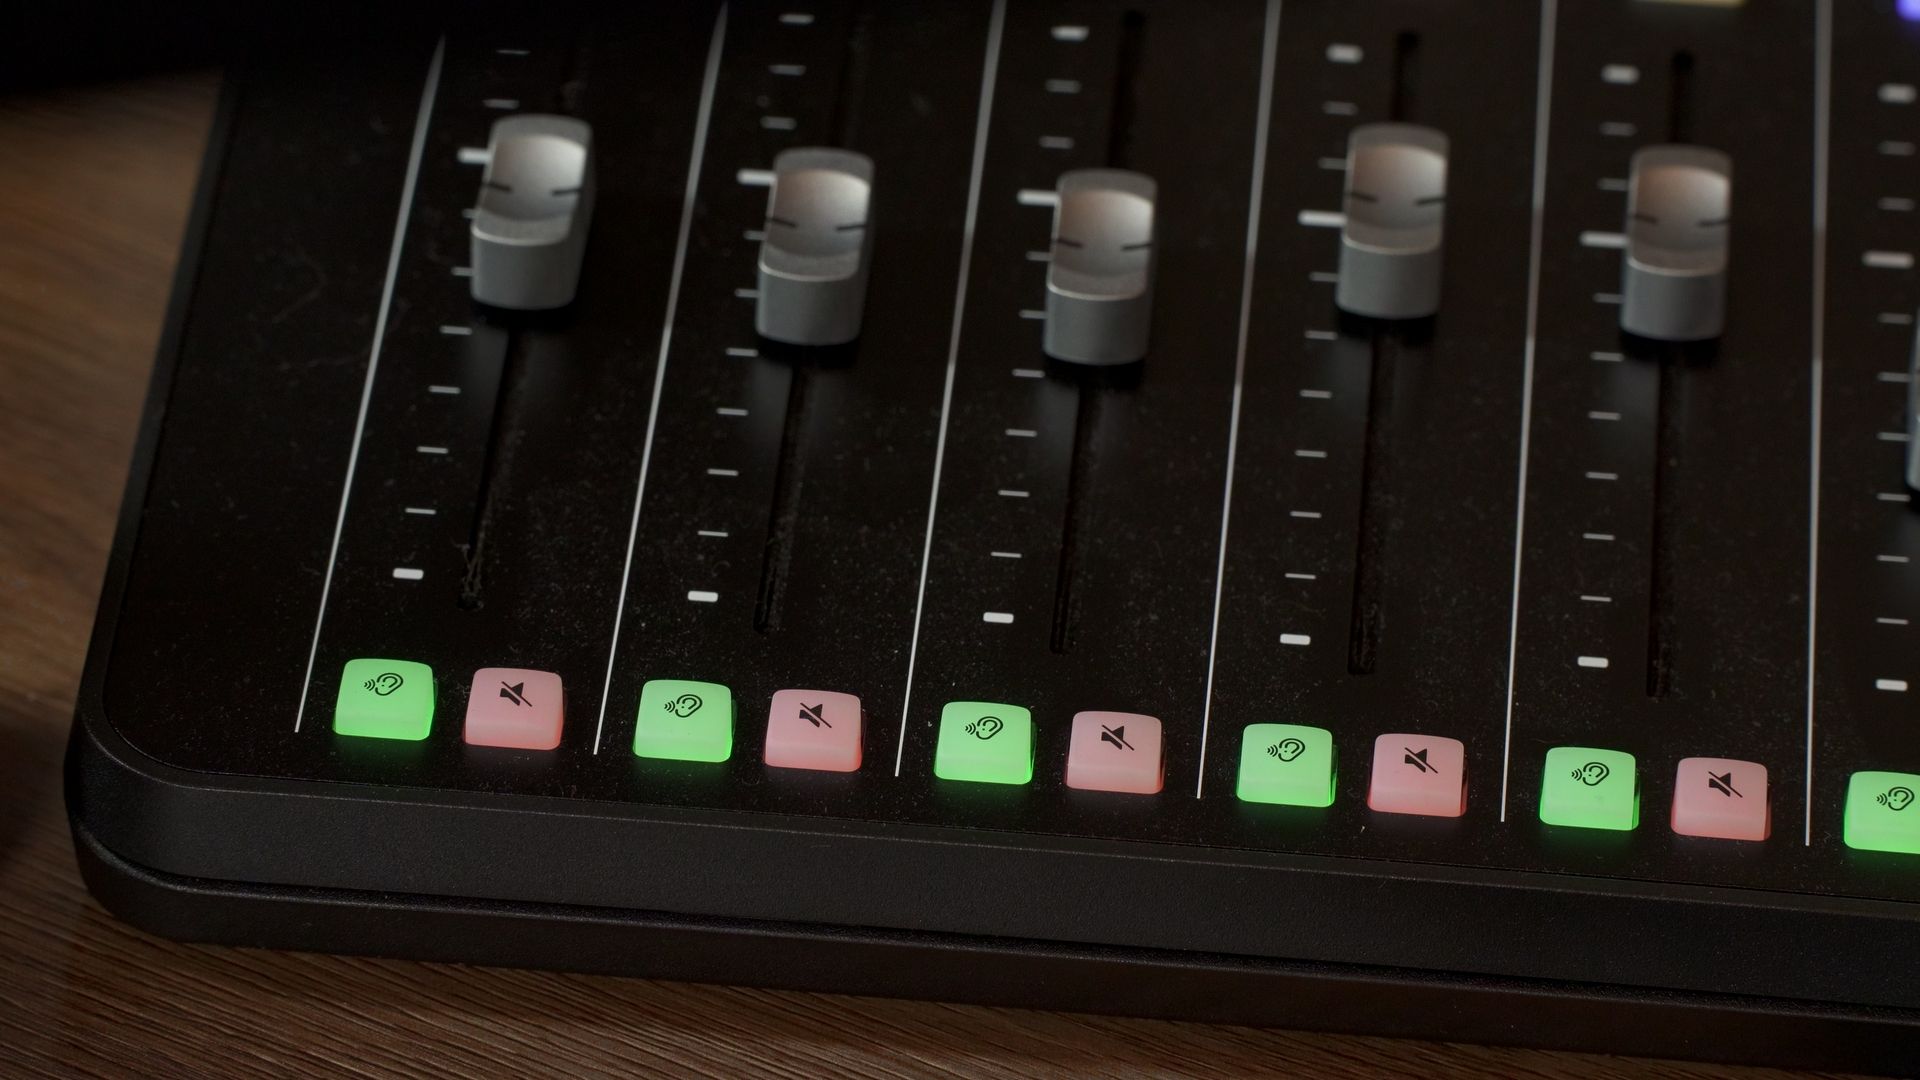 Rodecaster Pro II: A mixing desk for all creatoors